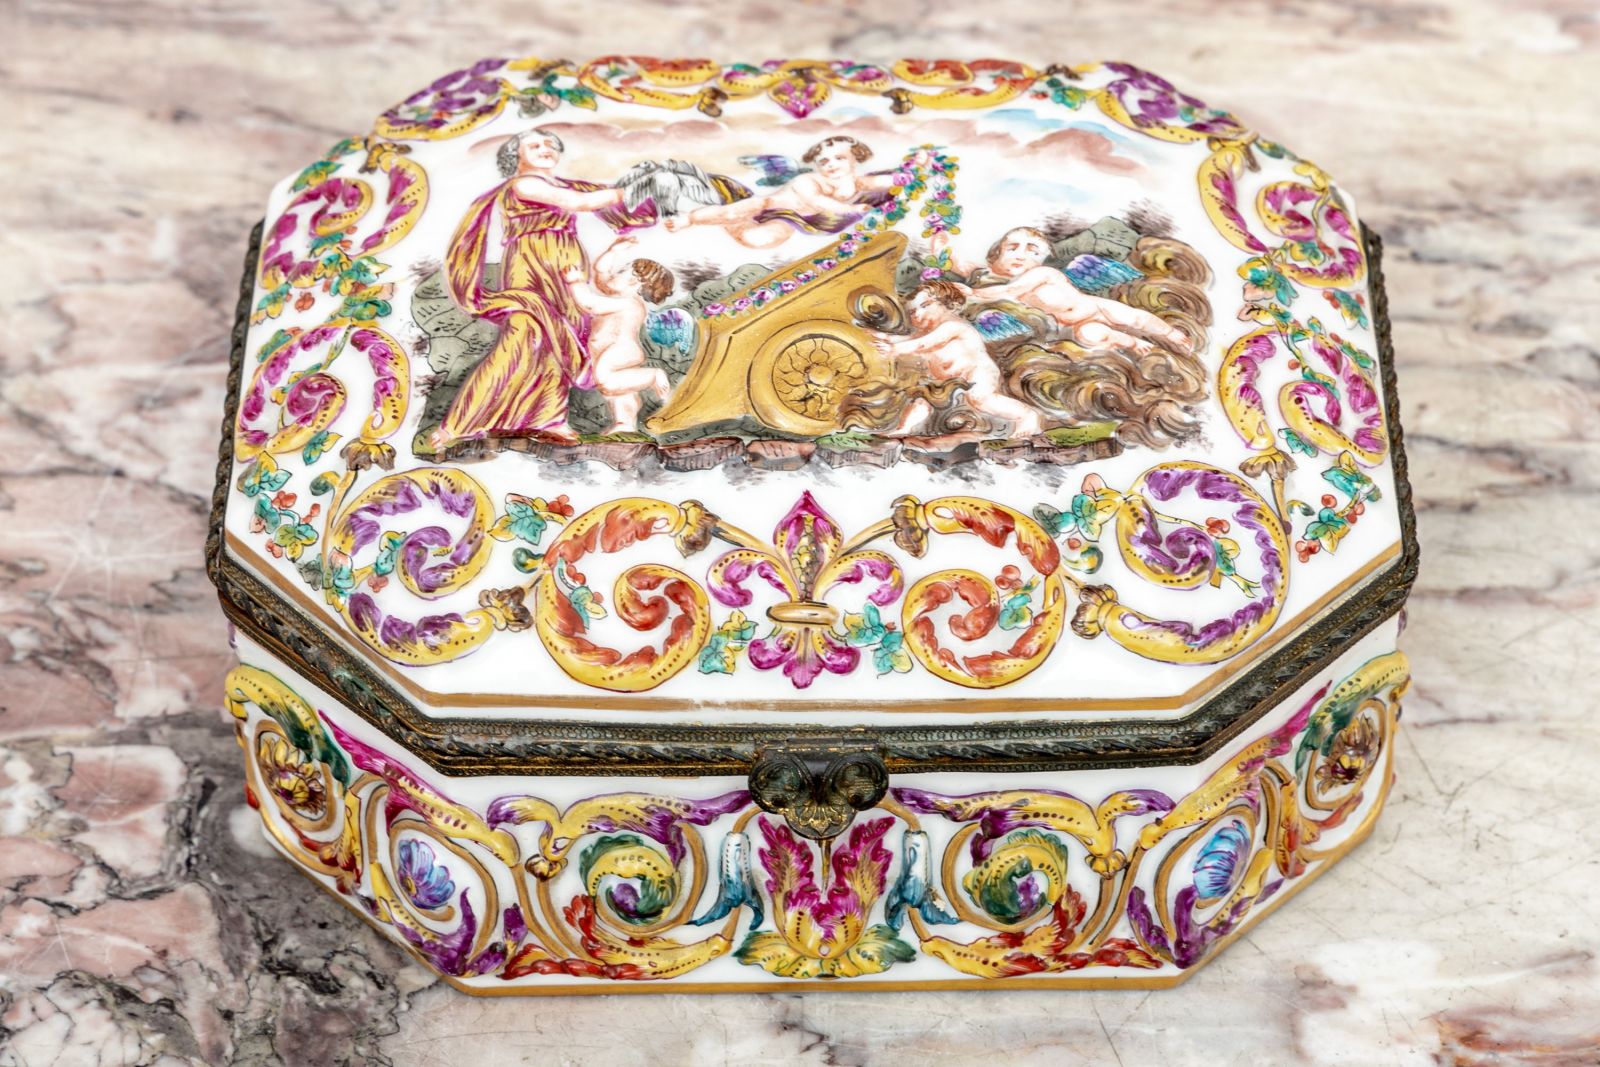 MARVELOUS CROWN NAPLES CAPODIMONTE PORCELAIN OCTAGONAL HINGED BOX AND COVER, 19TH C.